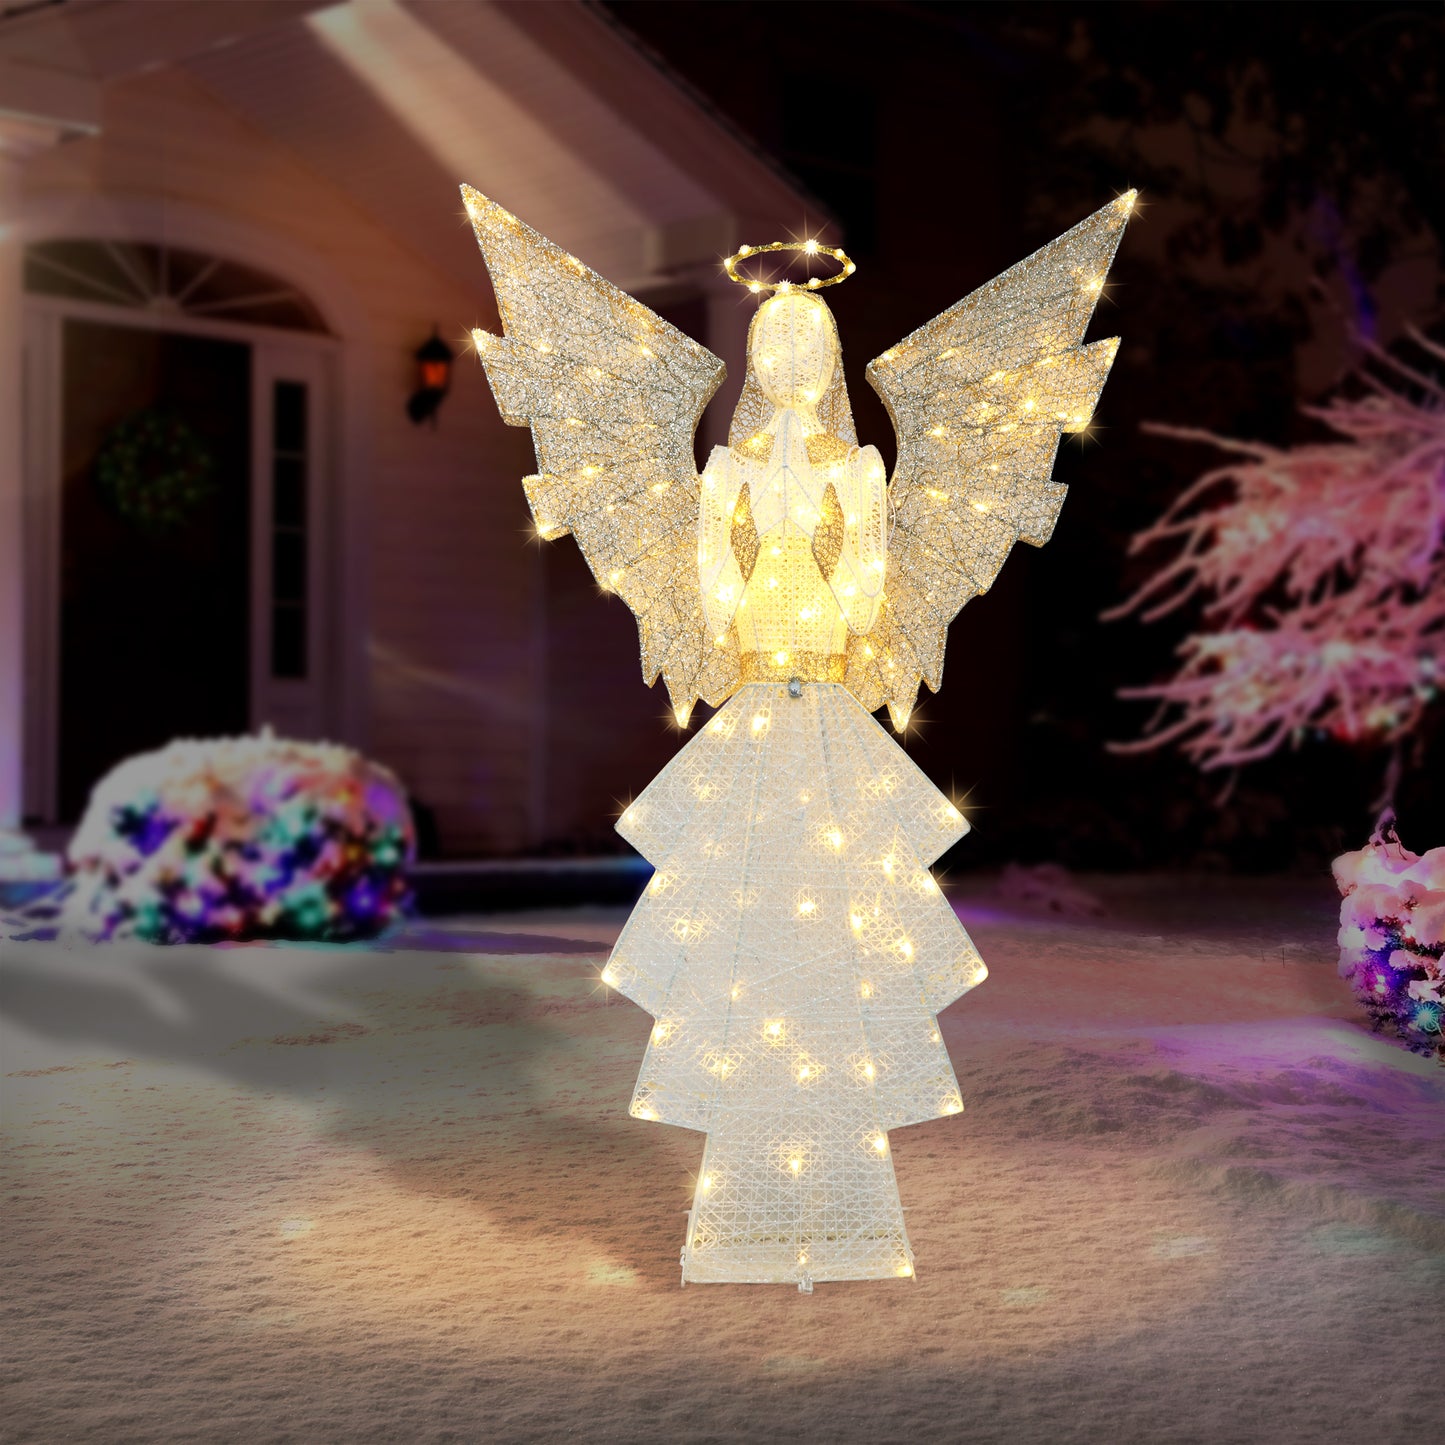 60" Outdoor Lighted Angel with 140 Lights, Gold/White